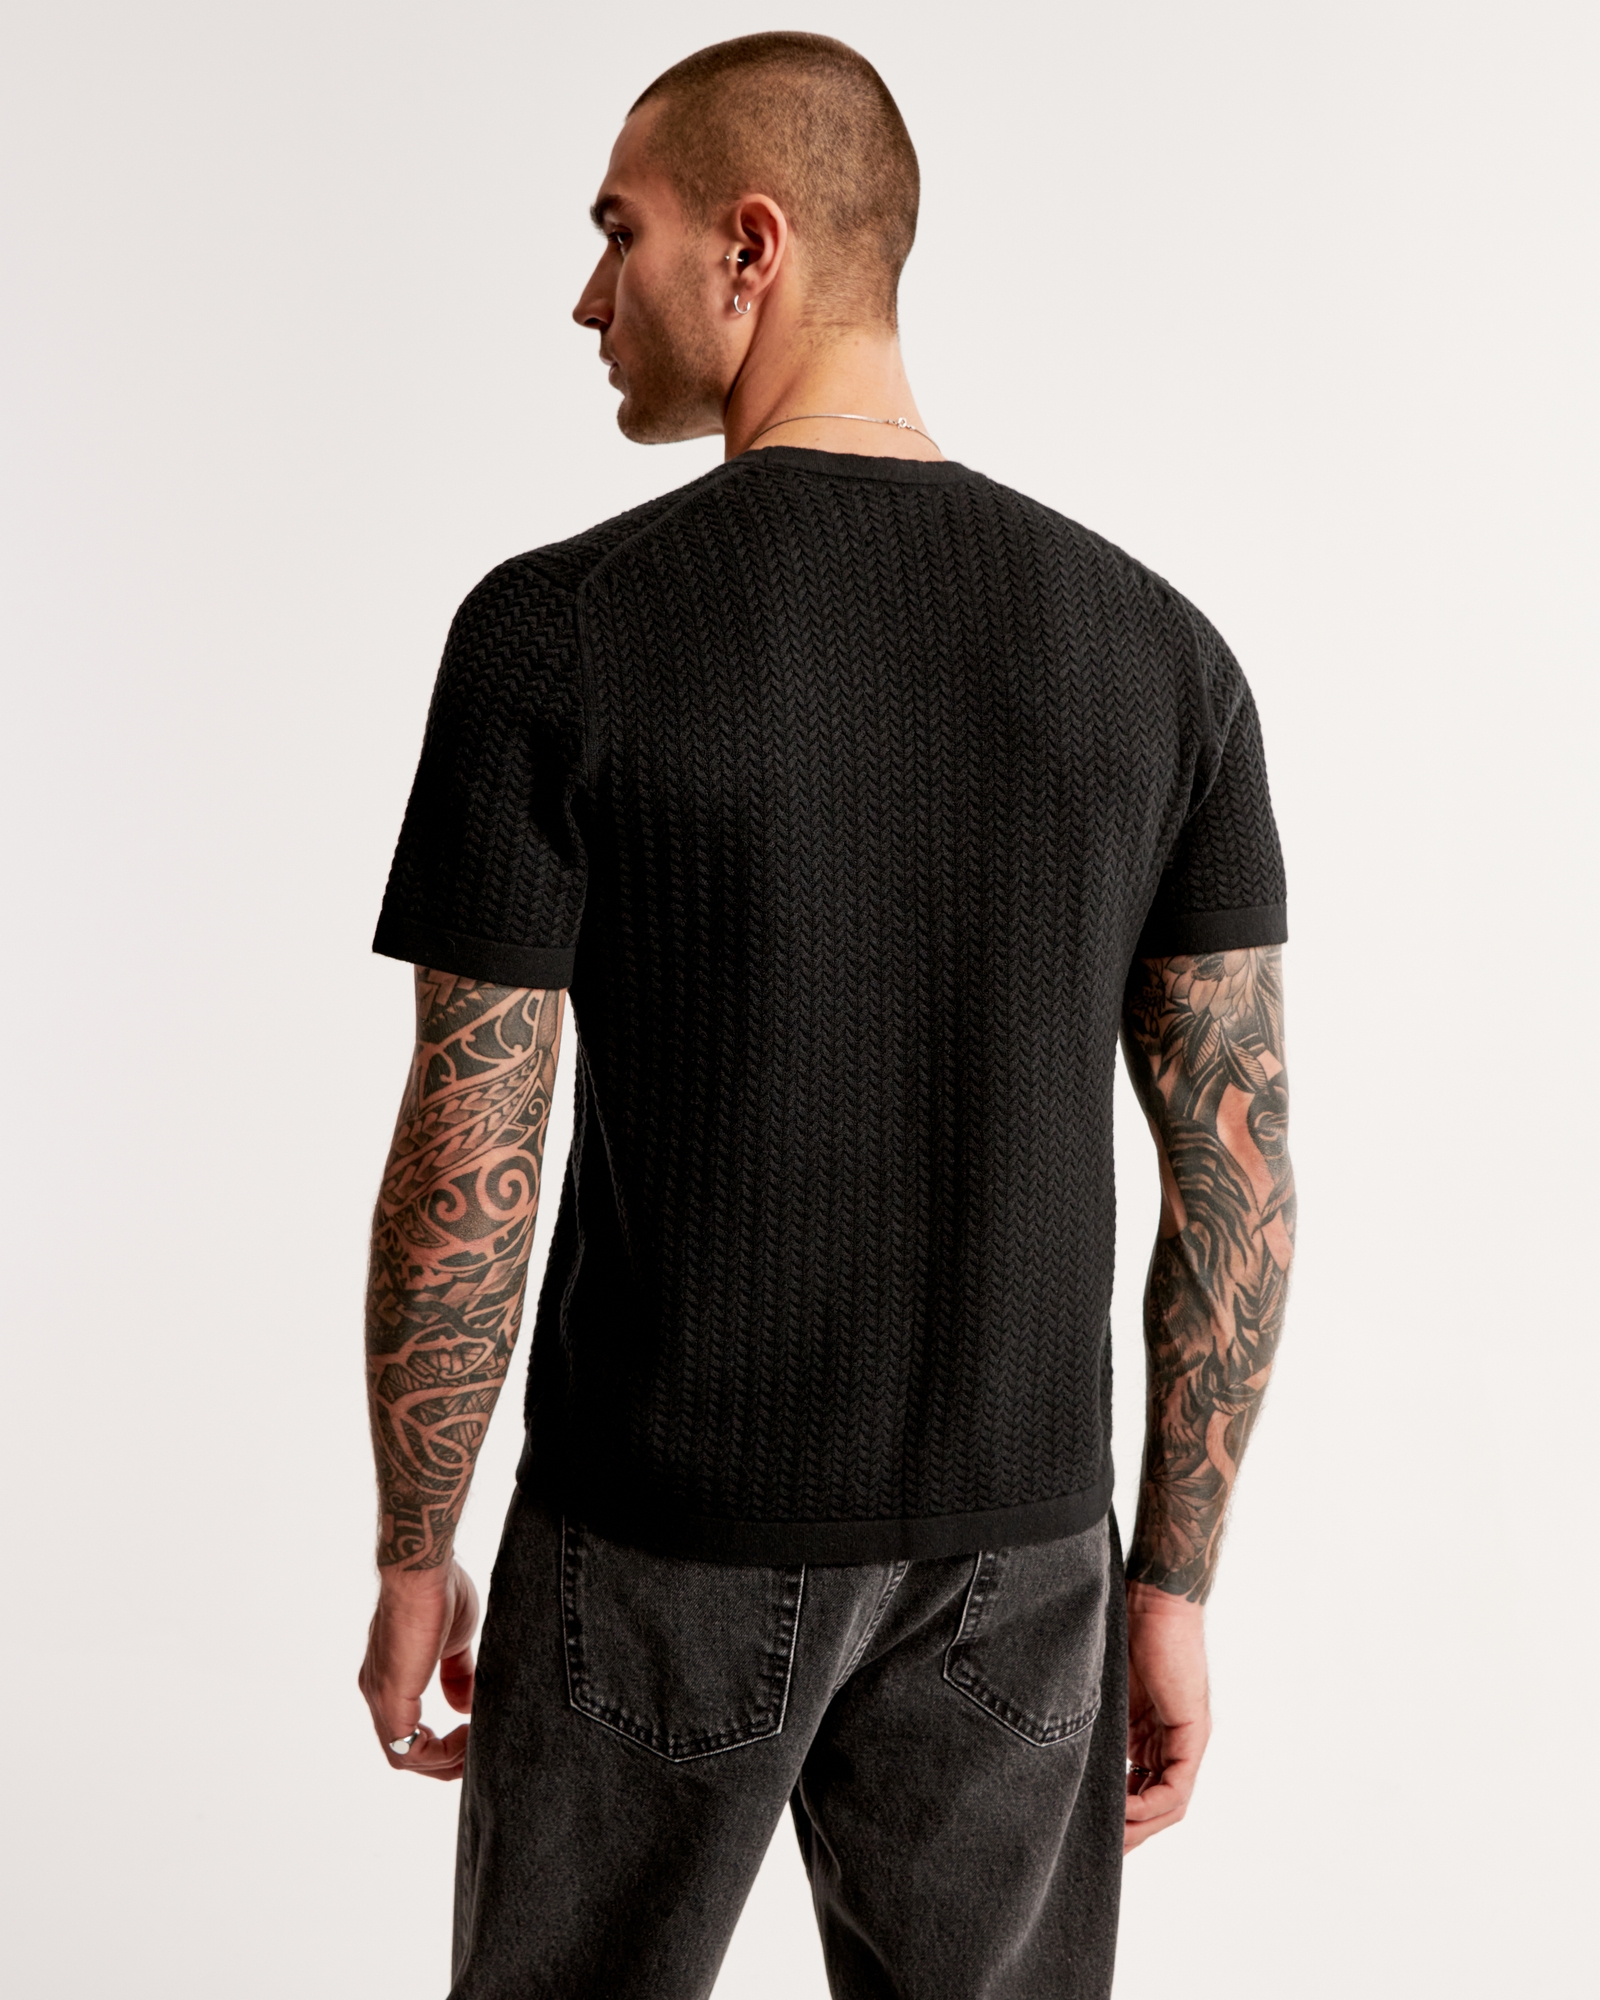 Stitched Textured Tee